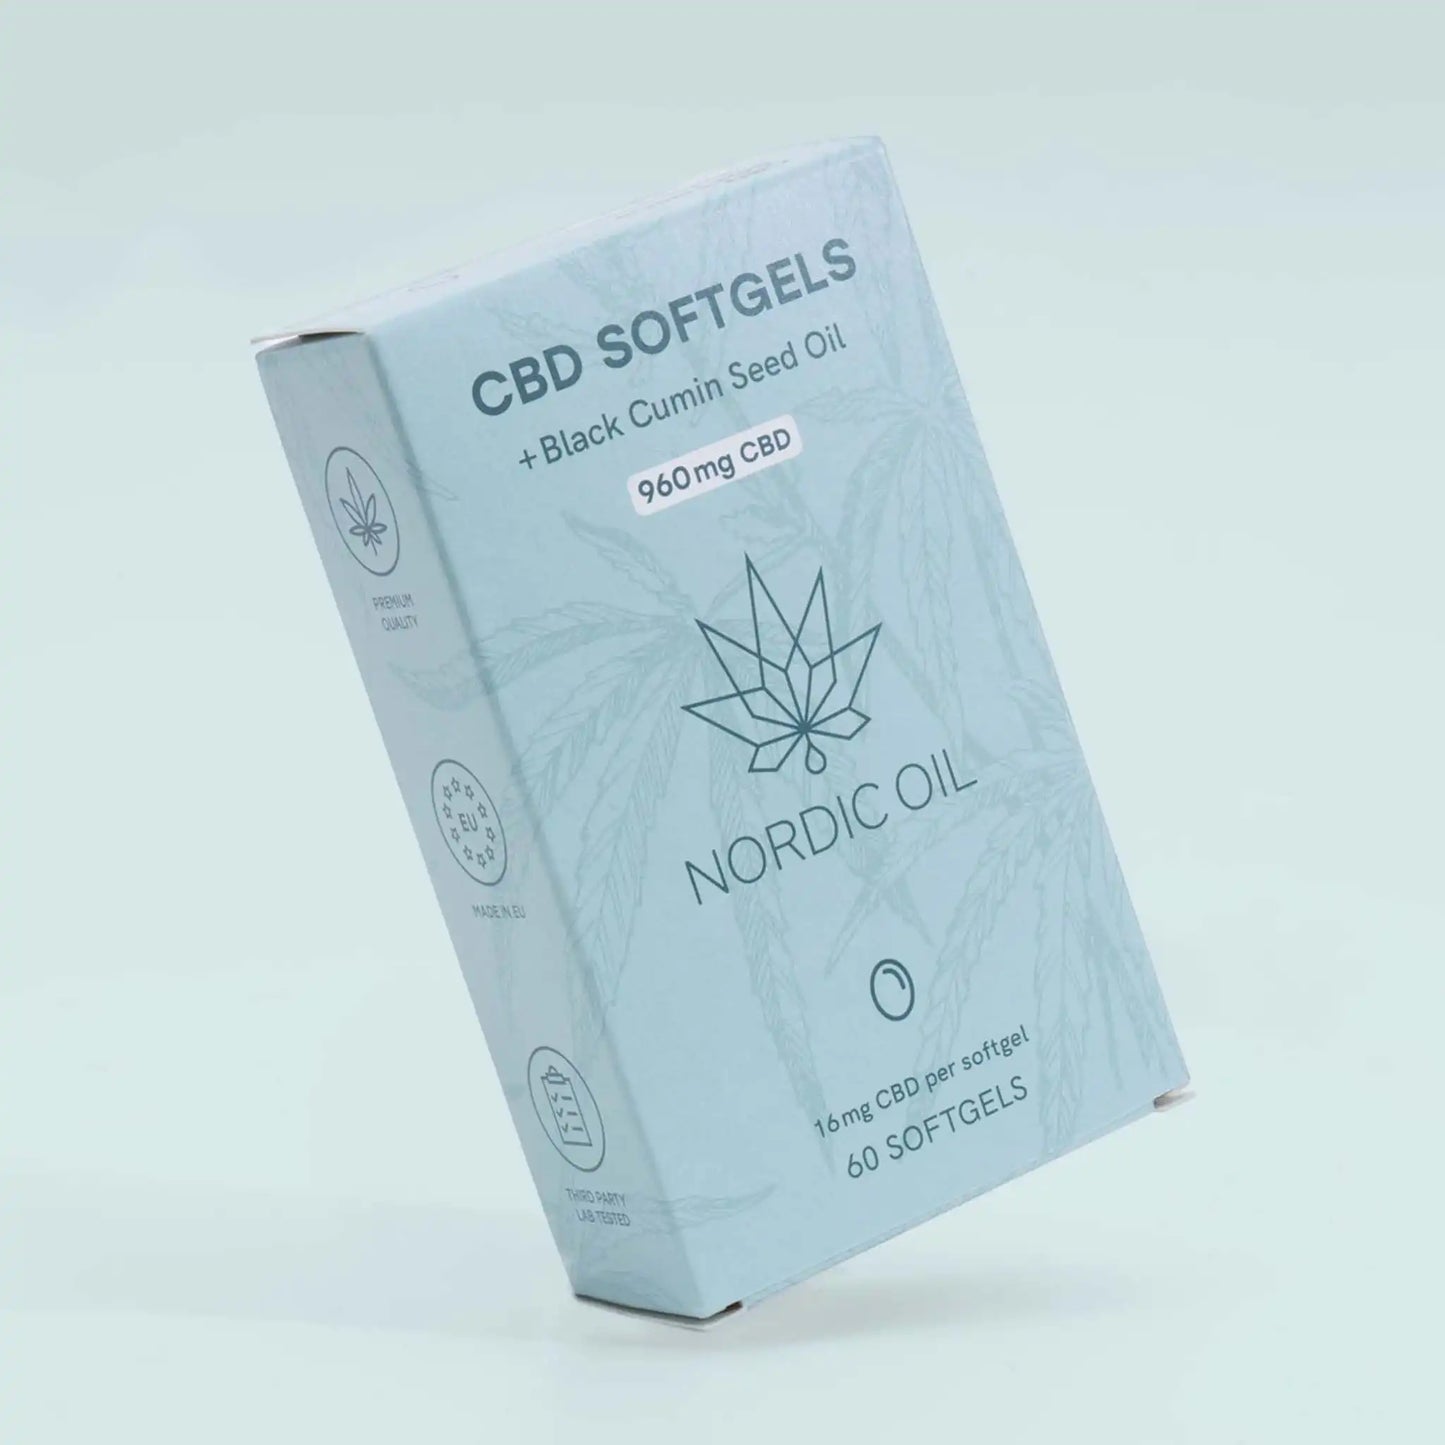 The package of CBD Capsules (960mg) is on the left edge, on a blue background.